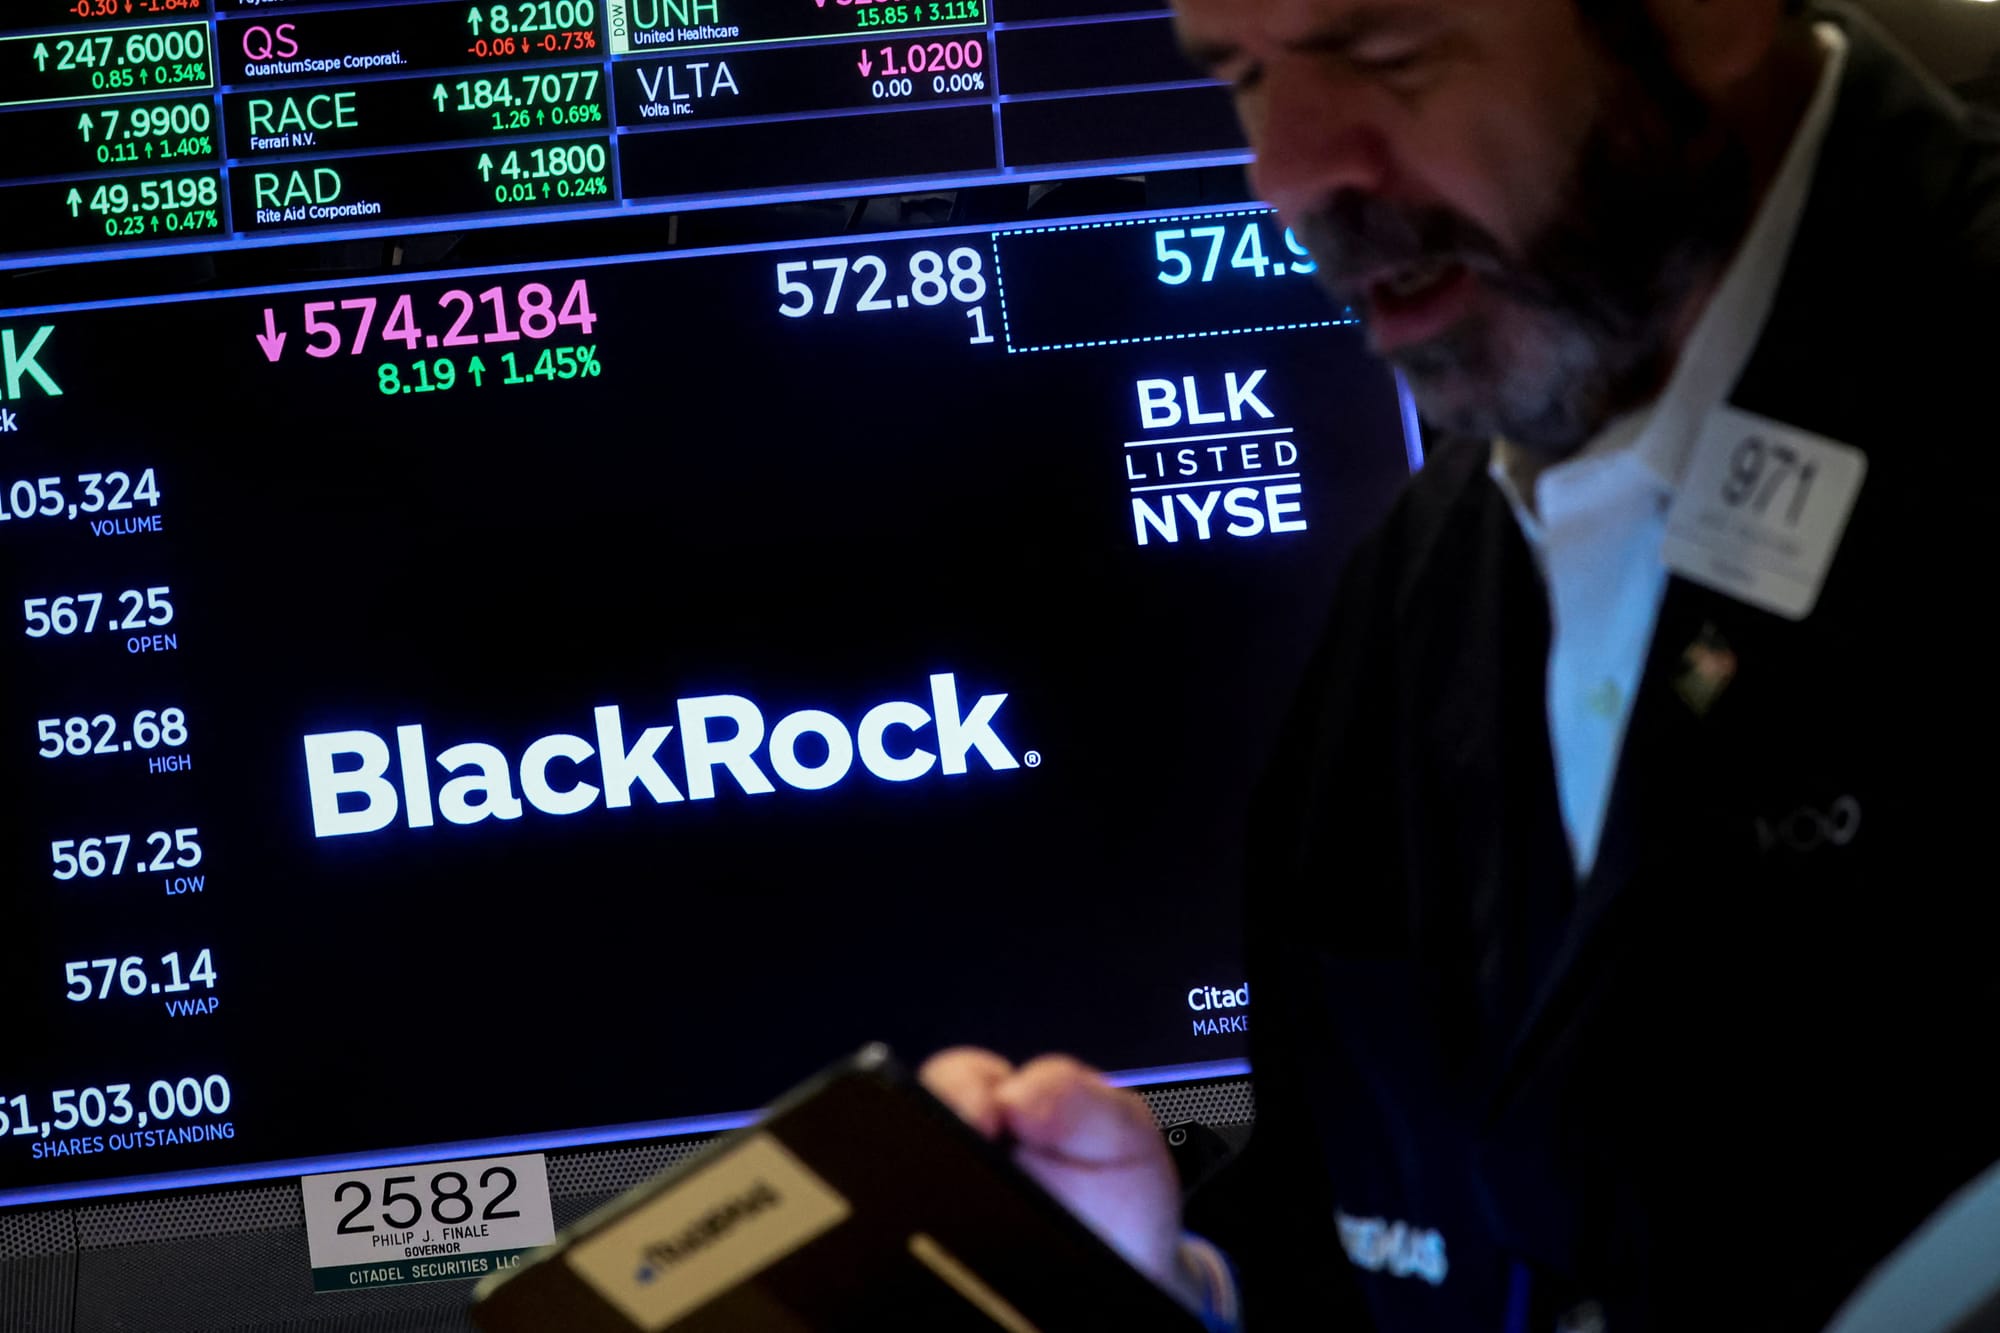 BlackRock Launches Groundbreaking ETF for Total Downside Protection Amid Market Volatility